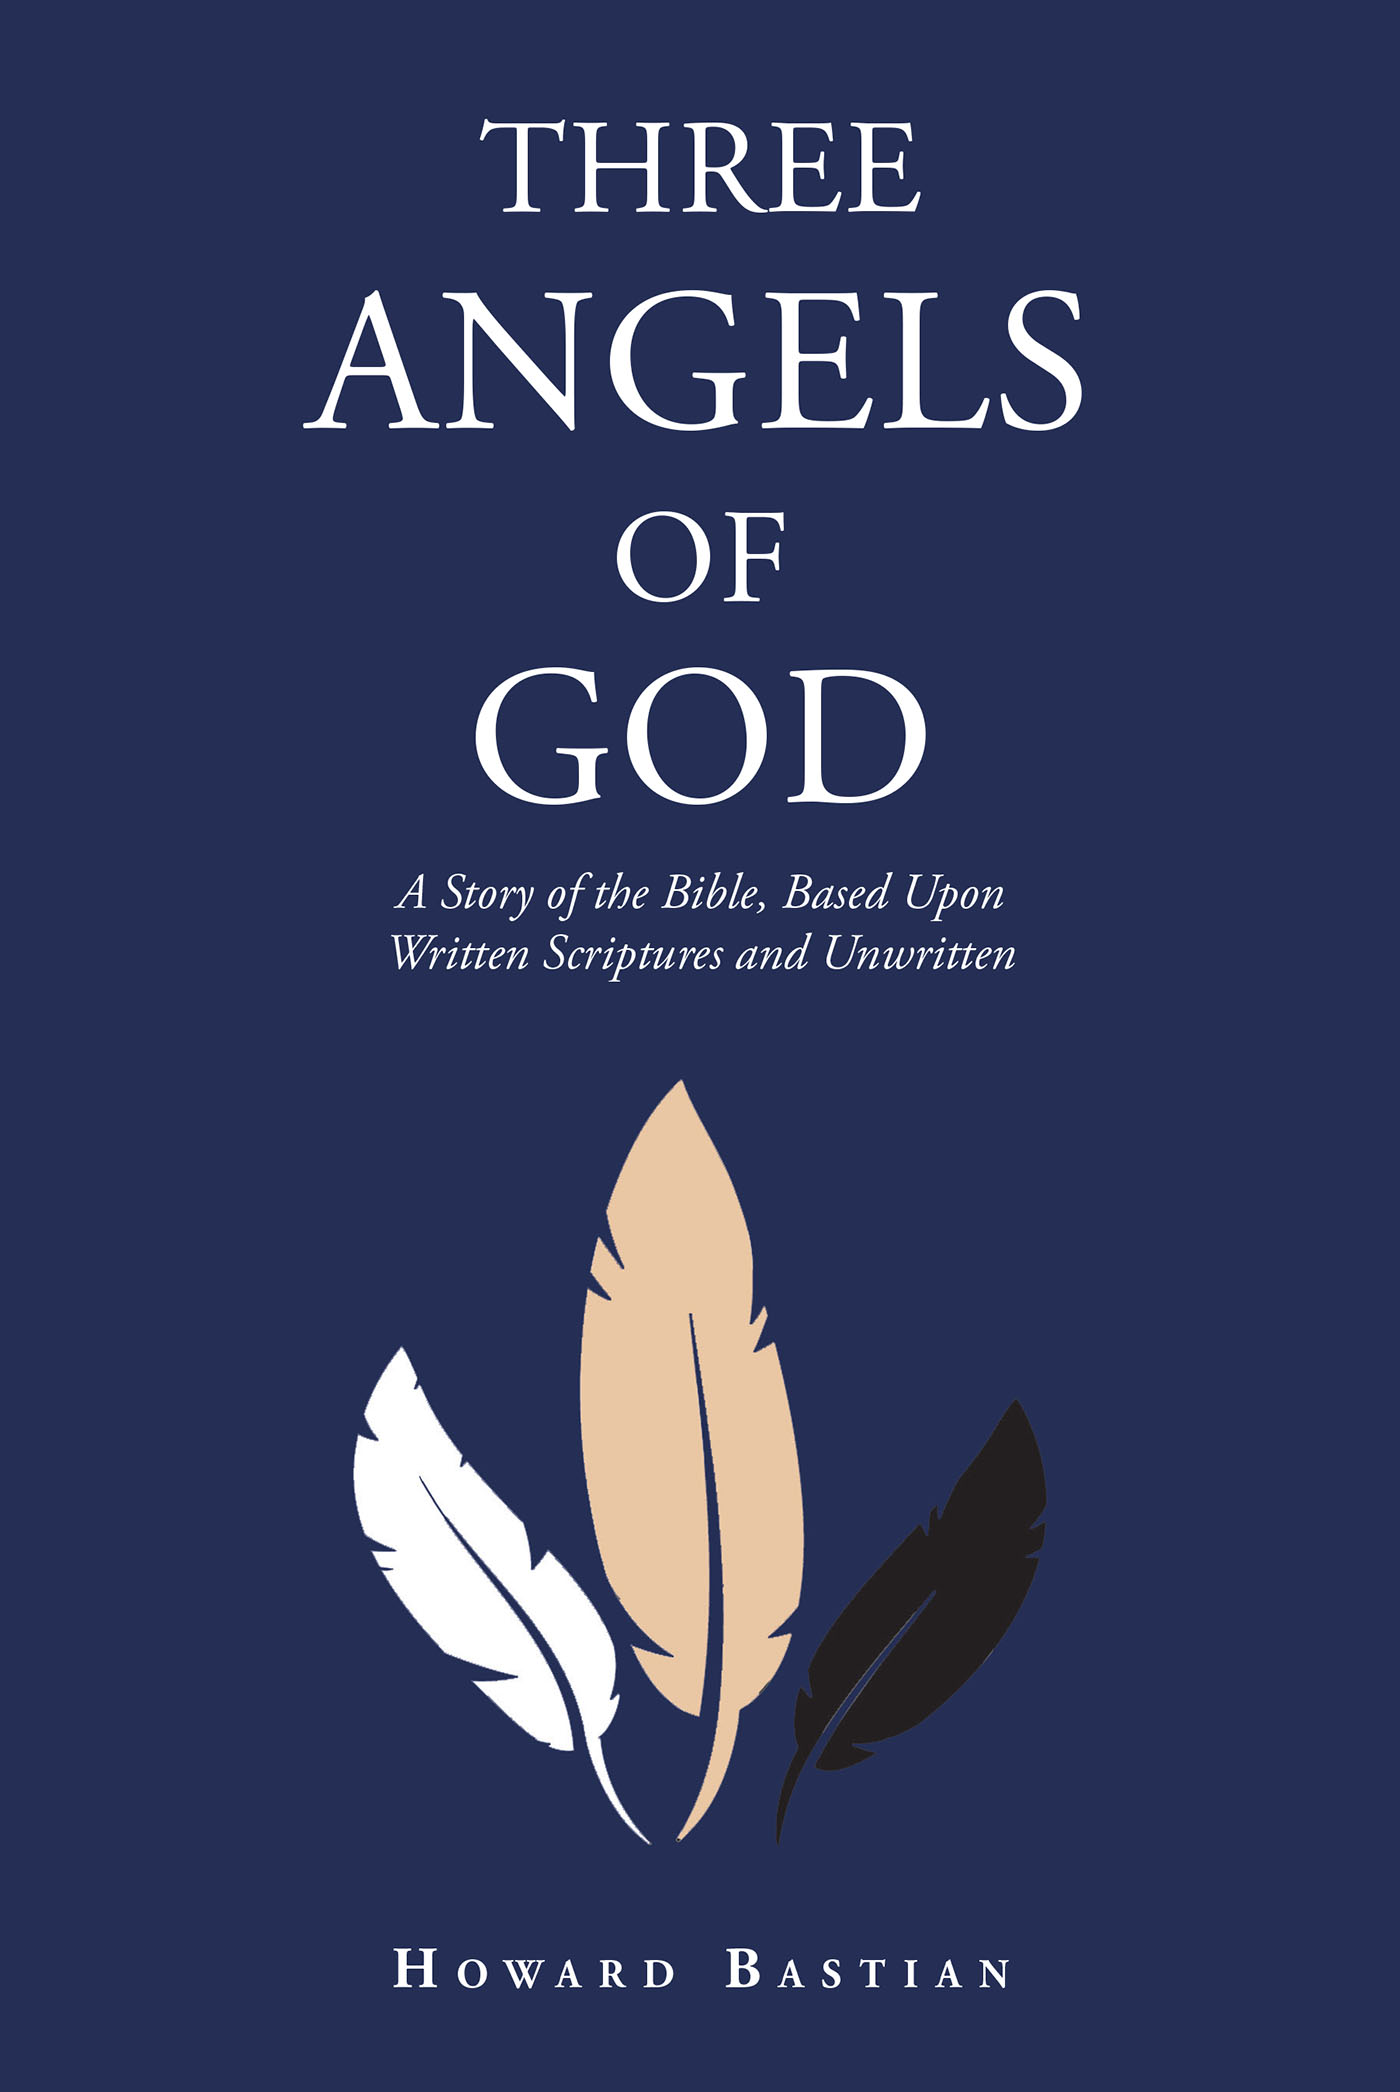 Howard Bastian’s Newly Released “Three Angels of God: A Story of the Bible, Based Upon Written Scriptures and Unwritten” is a Thoughtful Discussion of Biblical Knowledge